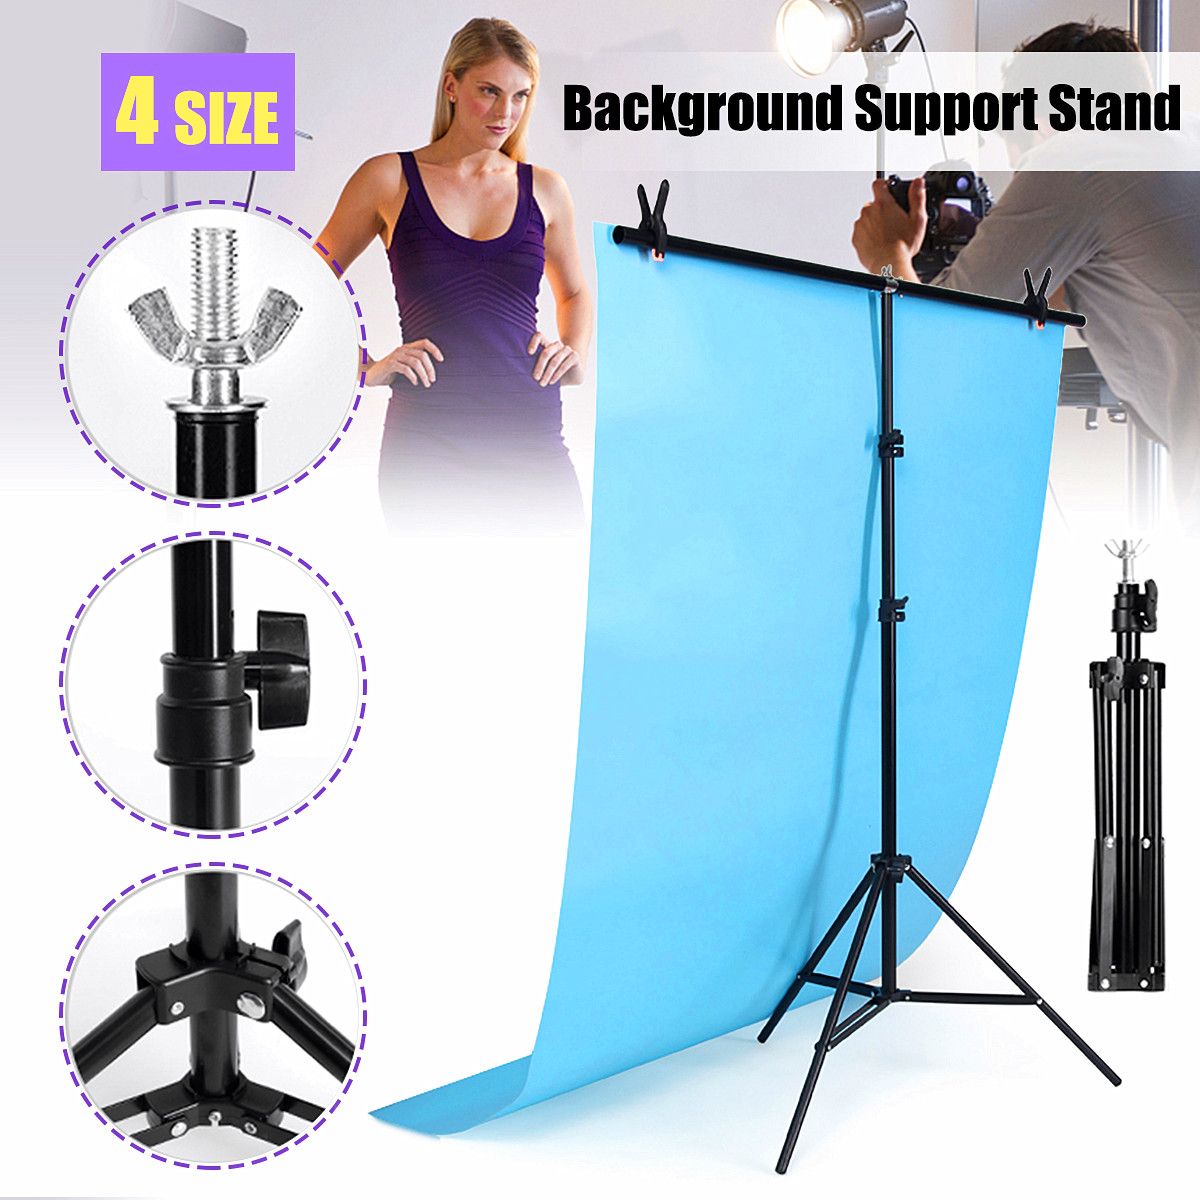 T-type-Adjustable-Background-Support-Stand-Phone-Holder-Backdrop-Photography-Equipment-1642523